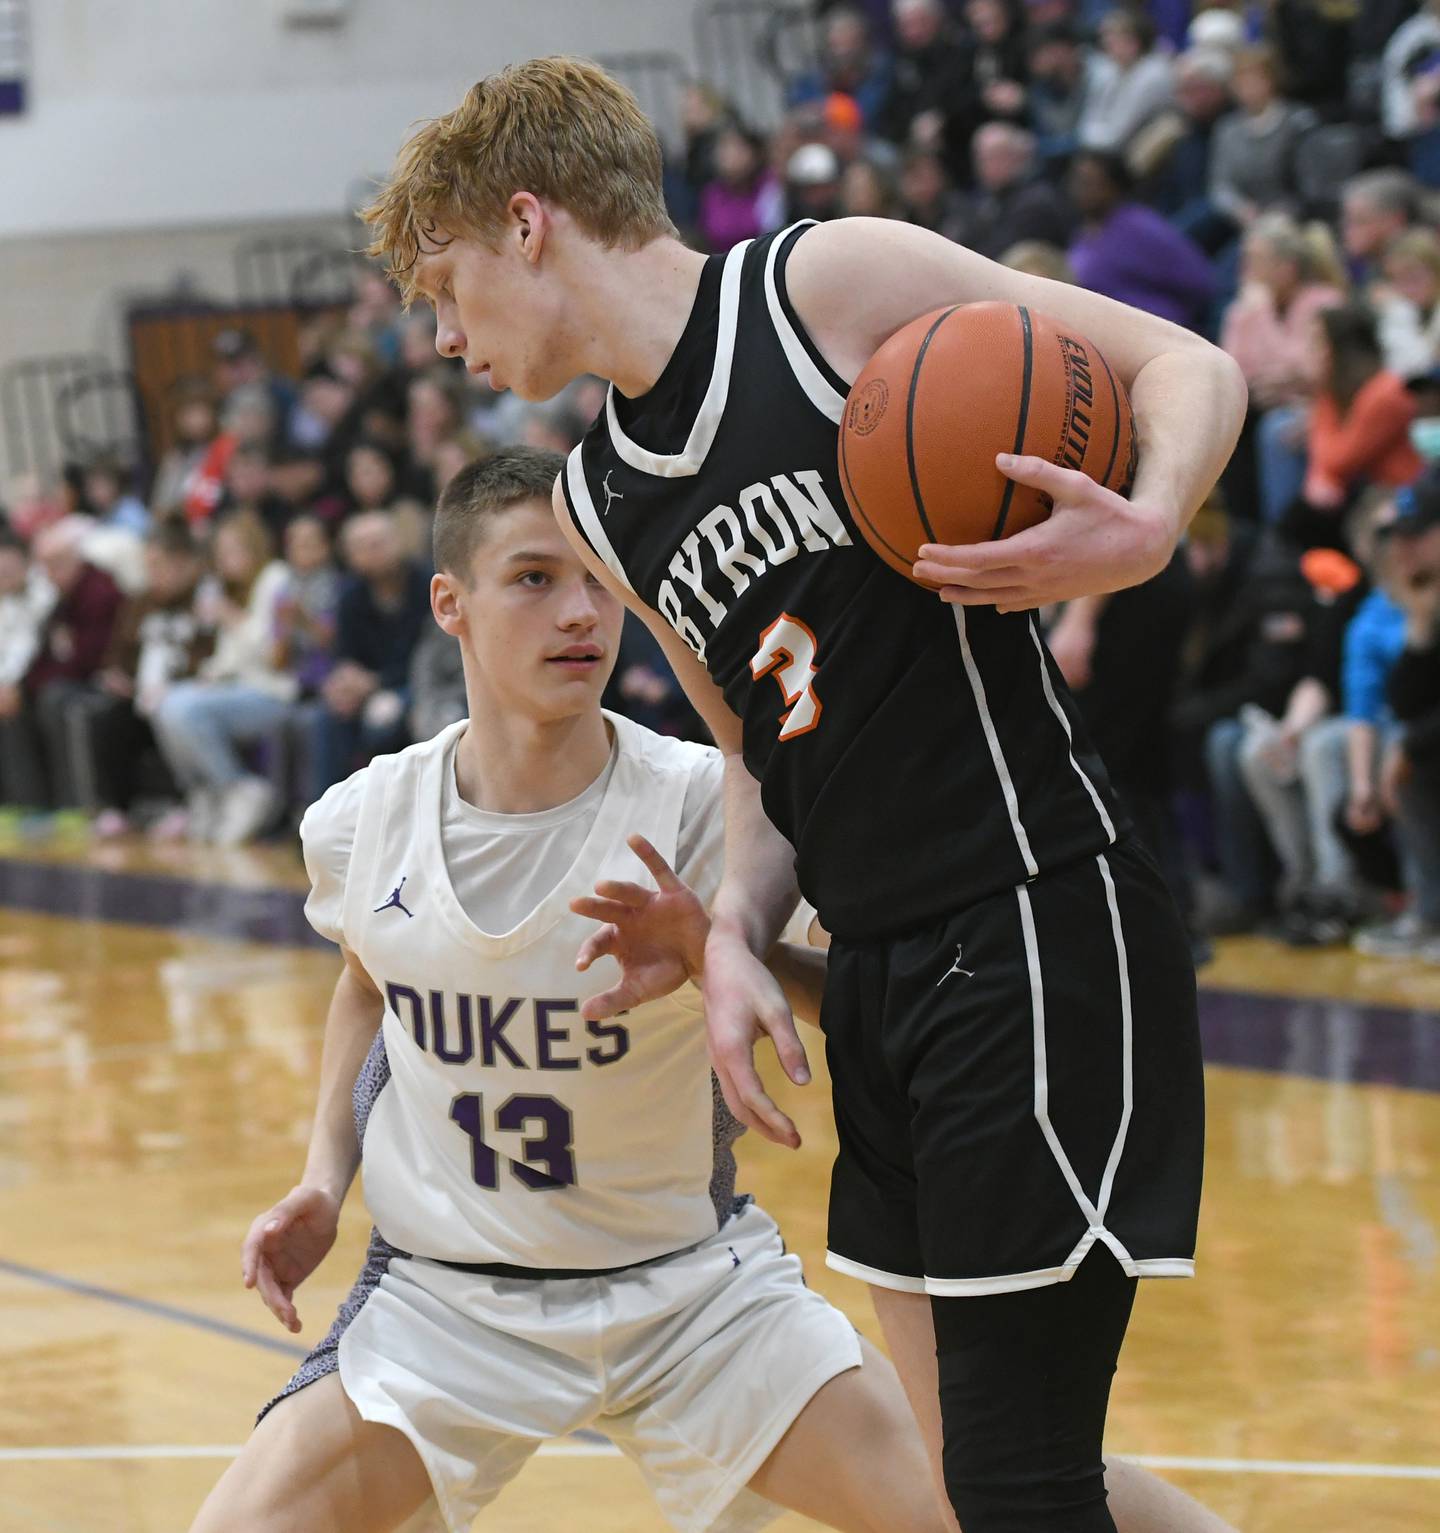 Dixon's Cullen Shaner (13) looks to steal the ball from Byron's Carson Buser (3) during Big Northern Conference action on Tuesday, Jan. 31 at Lancaster Gym.